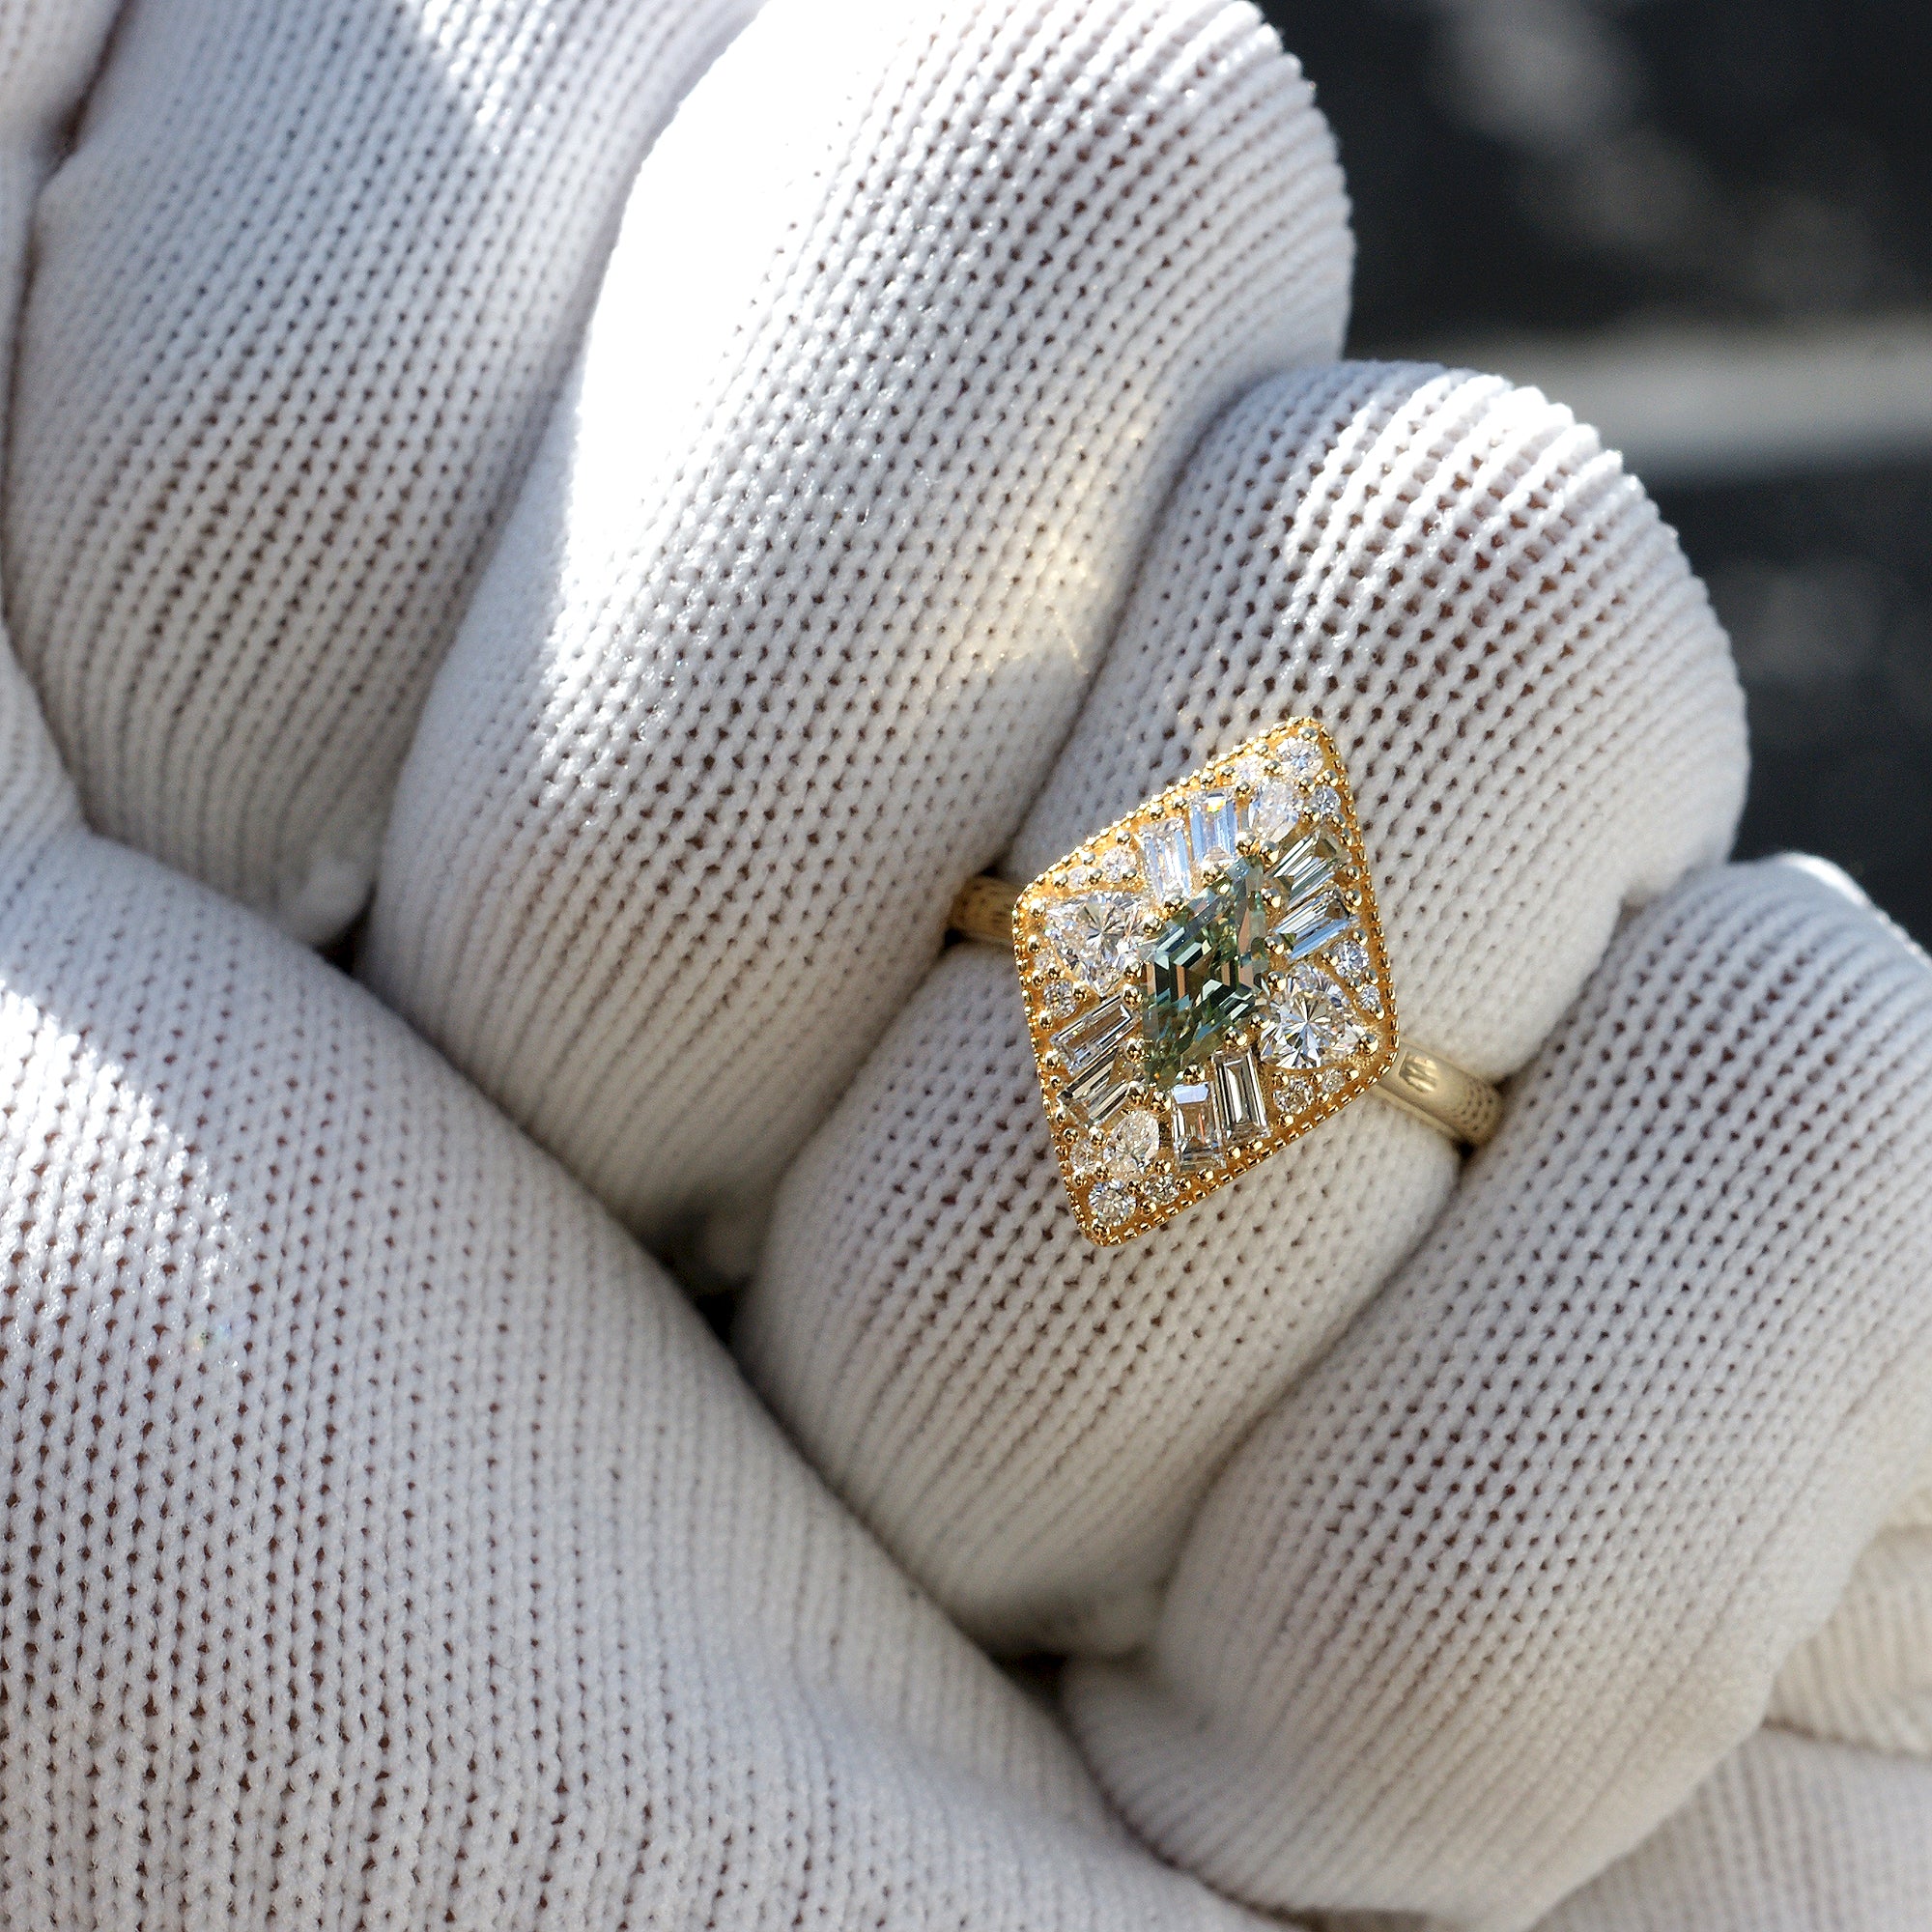 The Eloise Kite Green Sapphire Ring 18k Yellow Gold (1.44ct tw.)